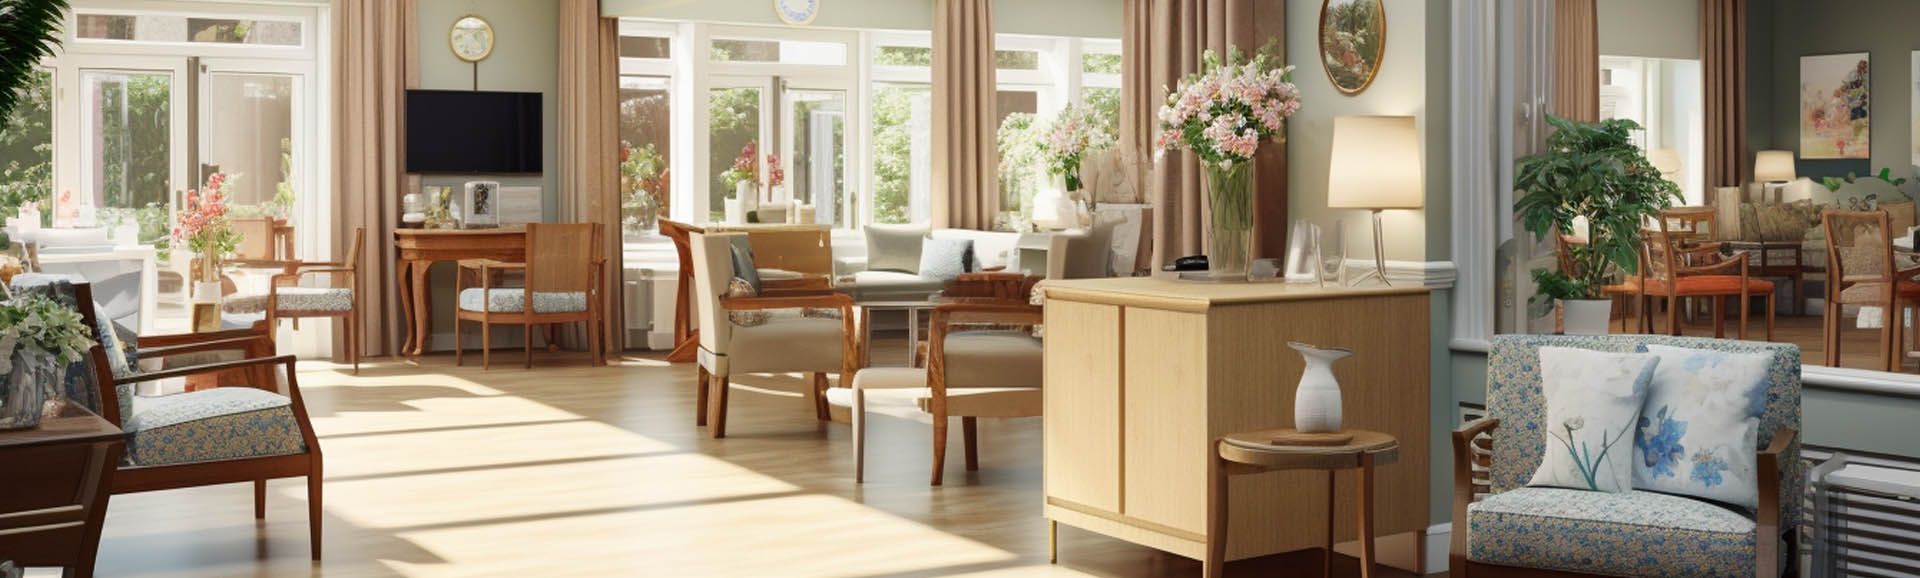 Interior space of a care home